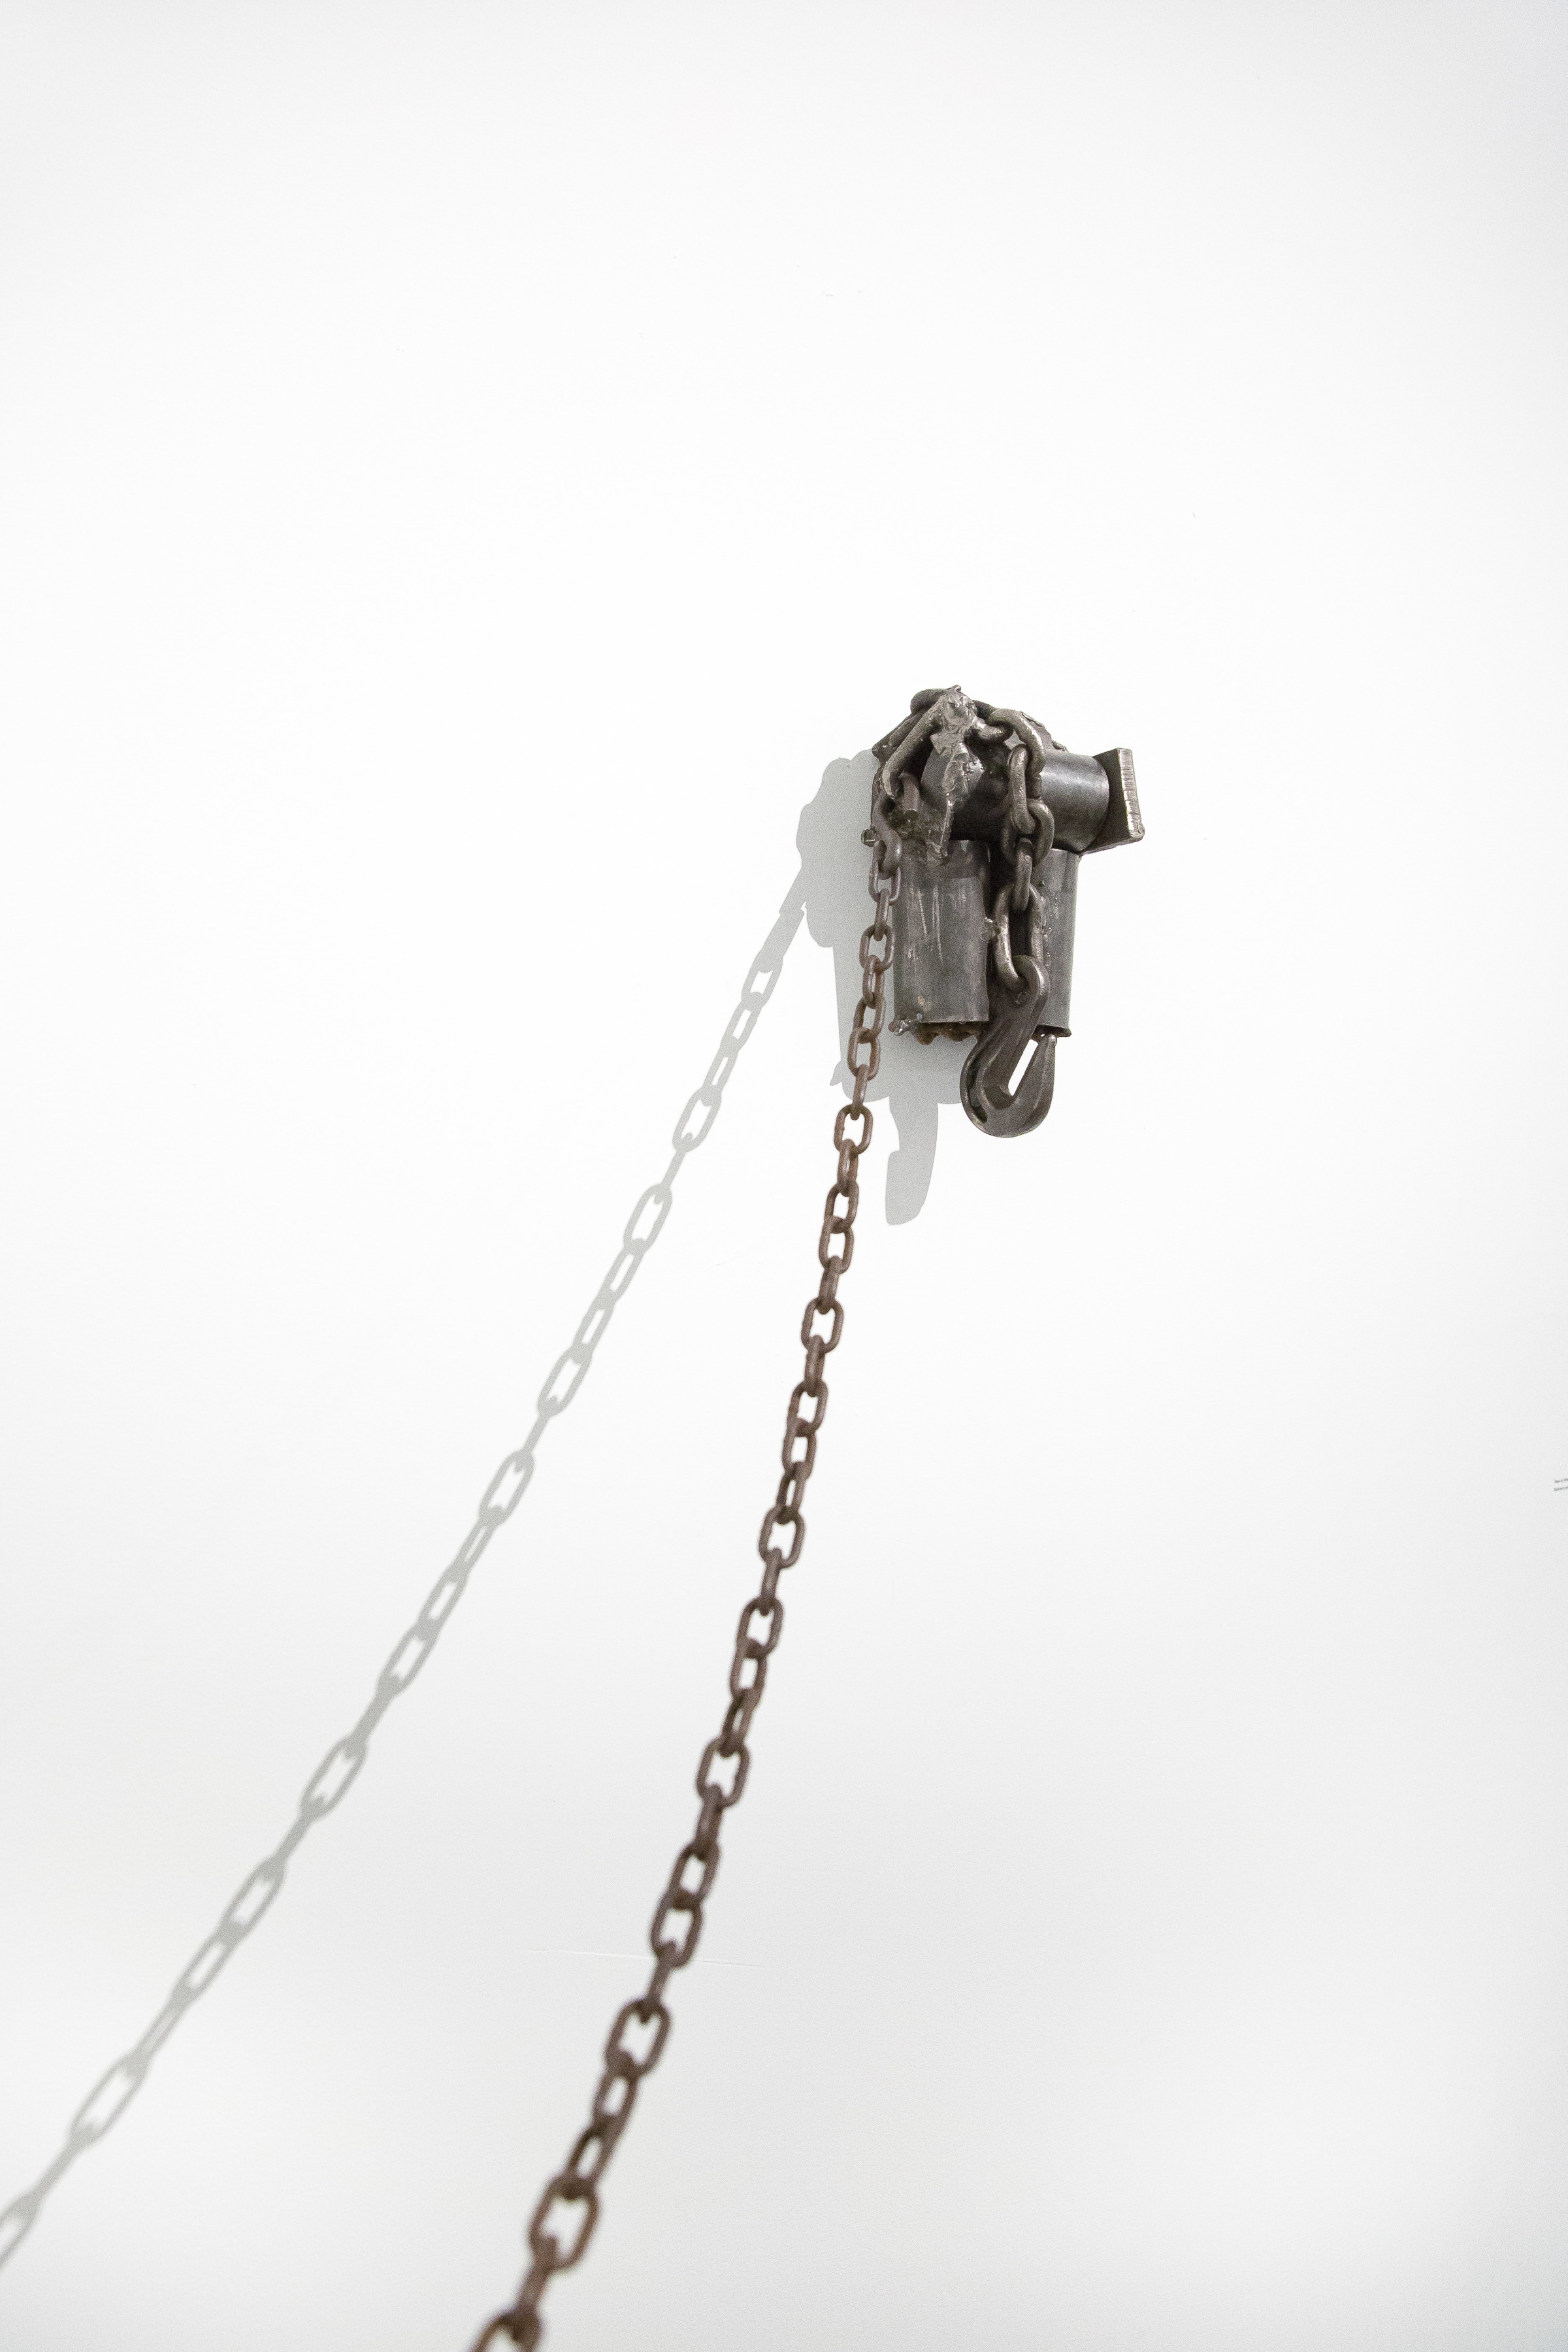 Two is One, detail, 2016, welded steel and chain, dimensions variable